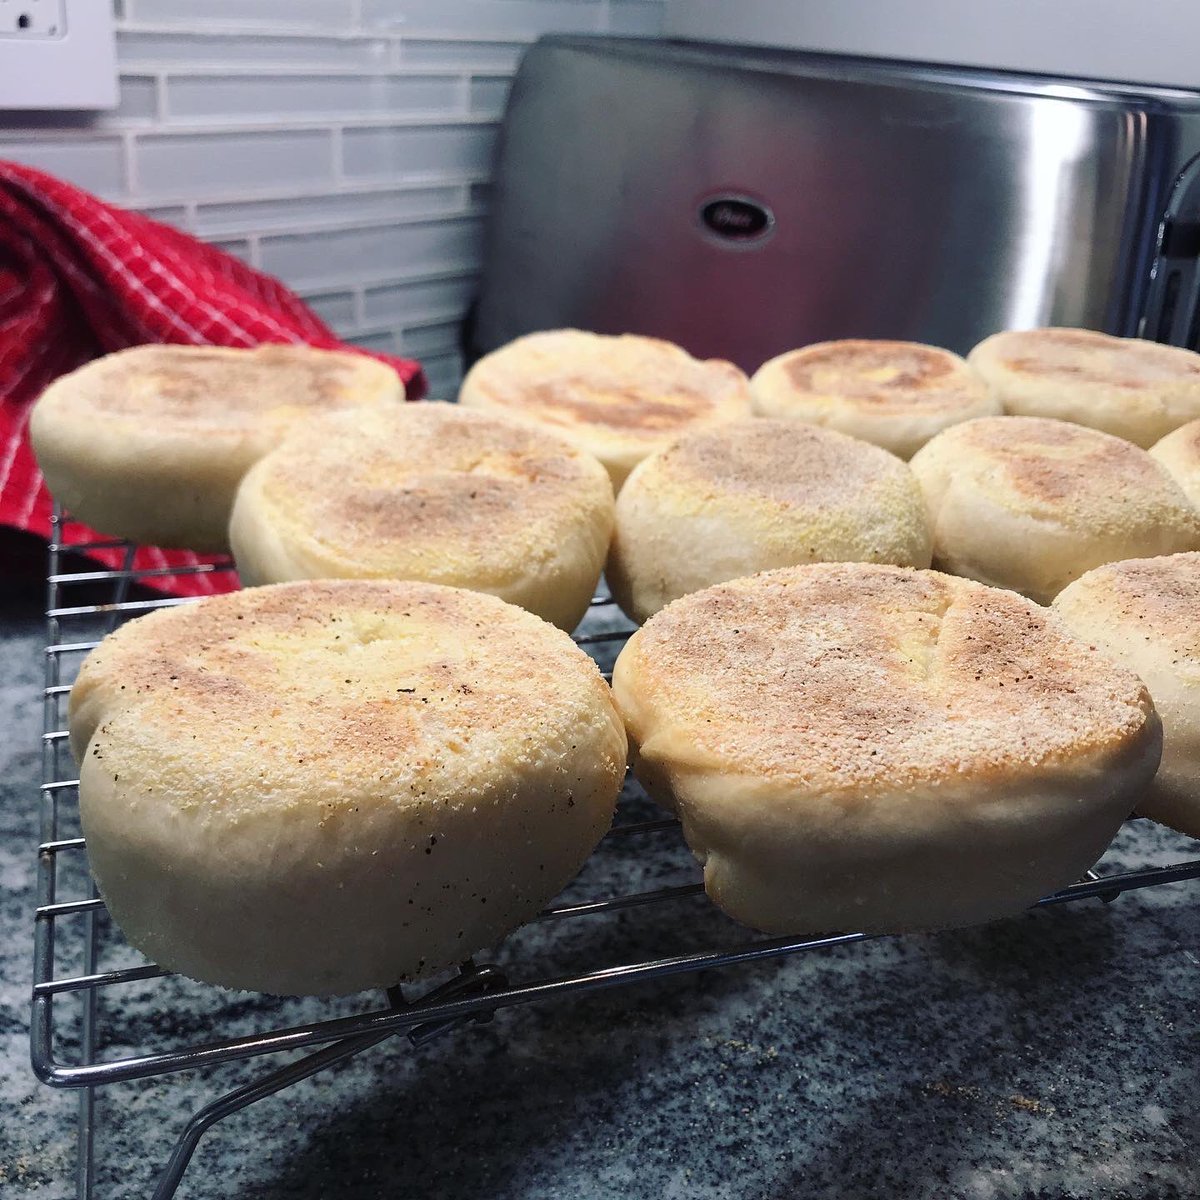 Bread #31: English Muffins. At 16-ish hours, these were a haul. And I sliced them with a knife, thus ruining my hooks and crannies! But they were tasty and a fun special project, with a unique place in my heart as my first time baking on IG live and while  #socialdistancing.